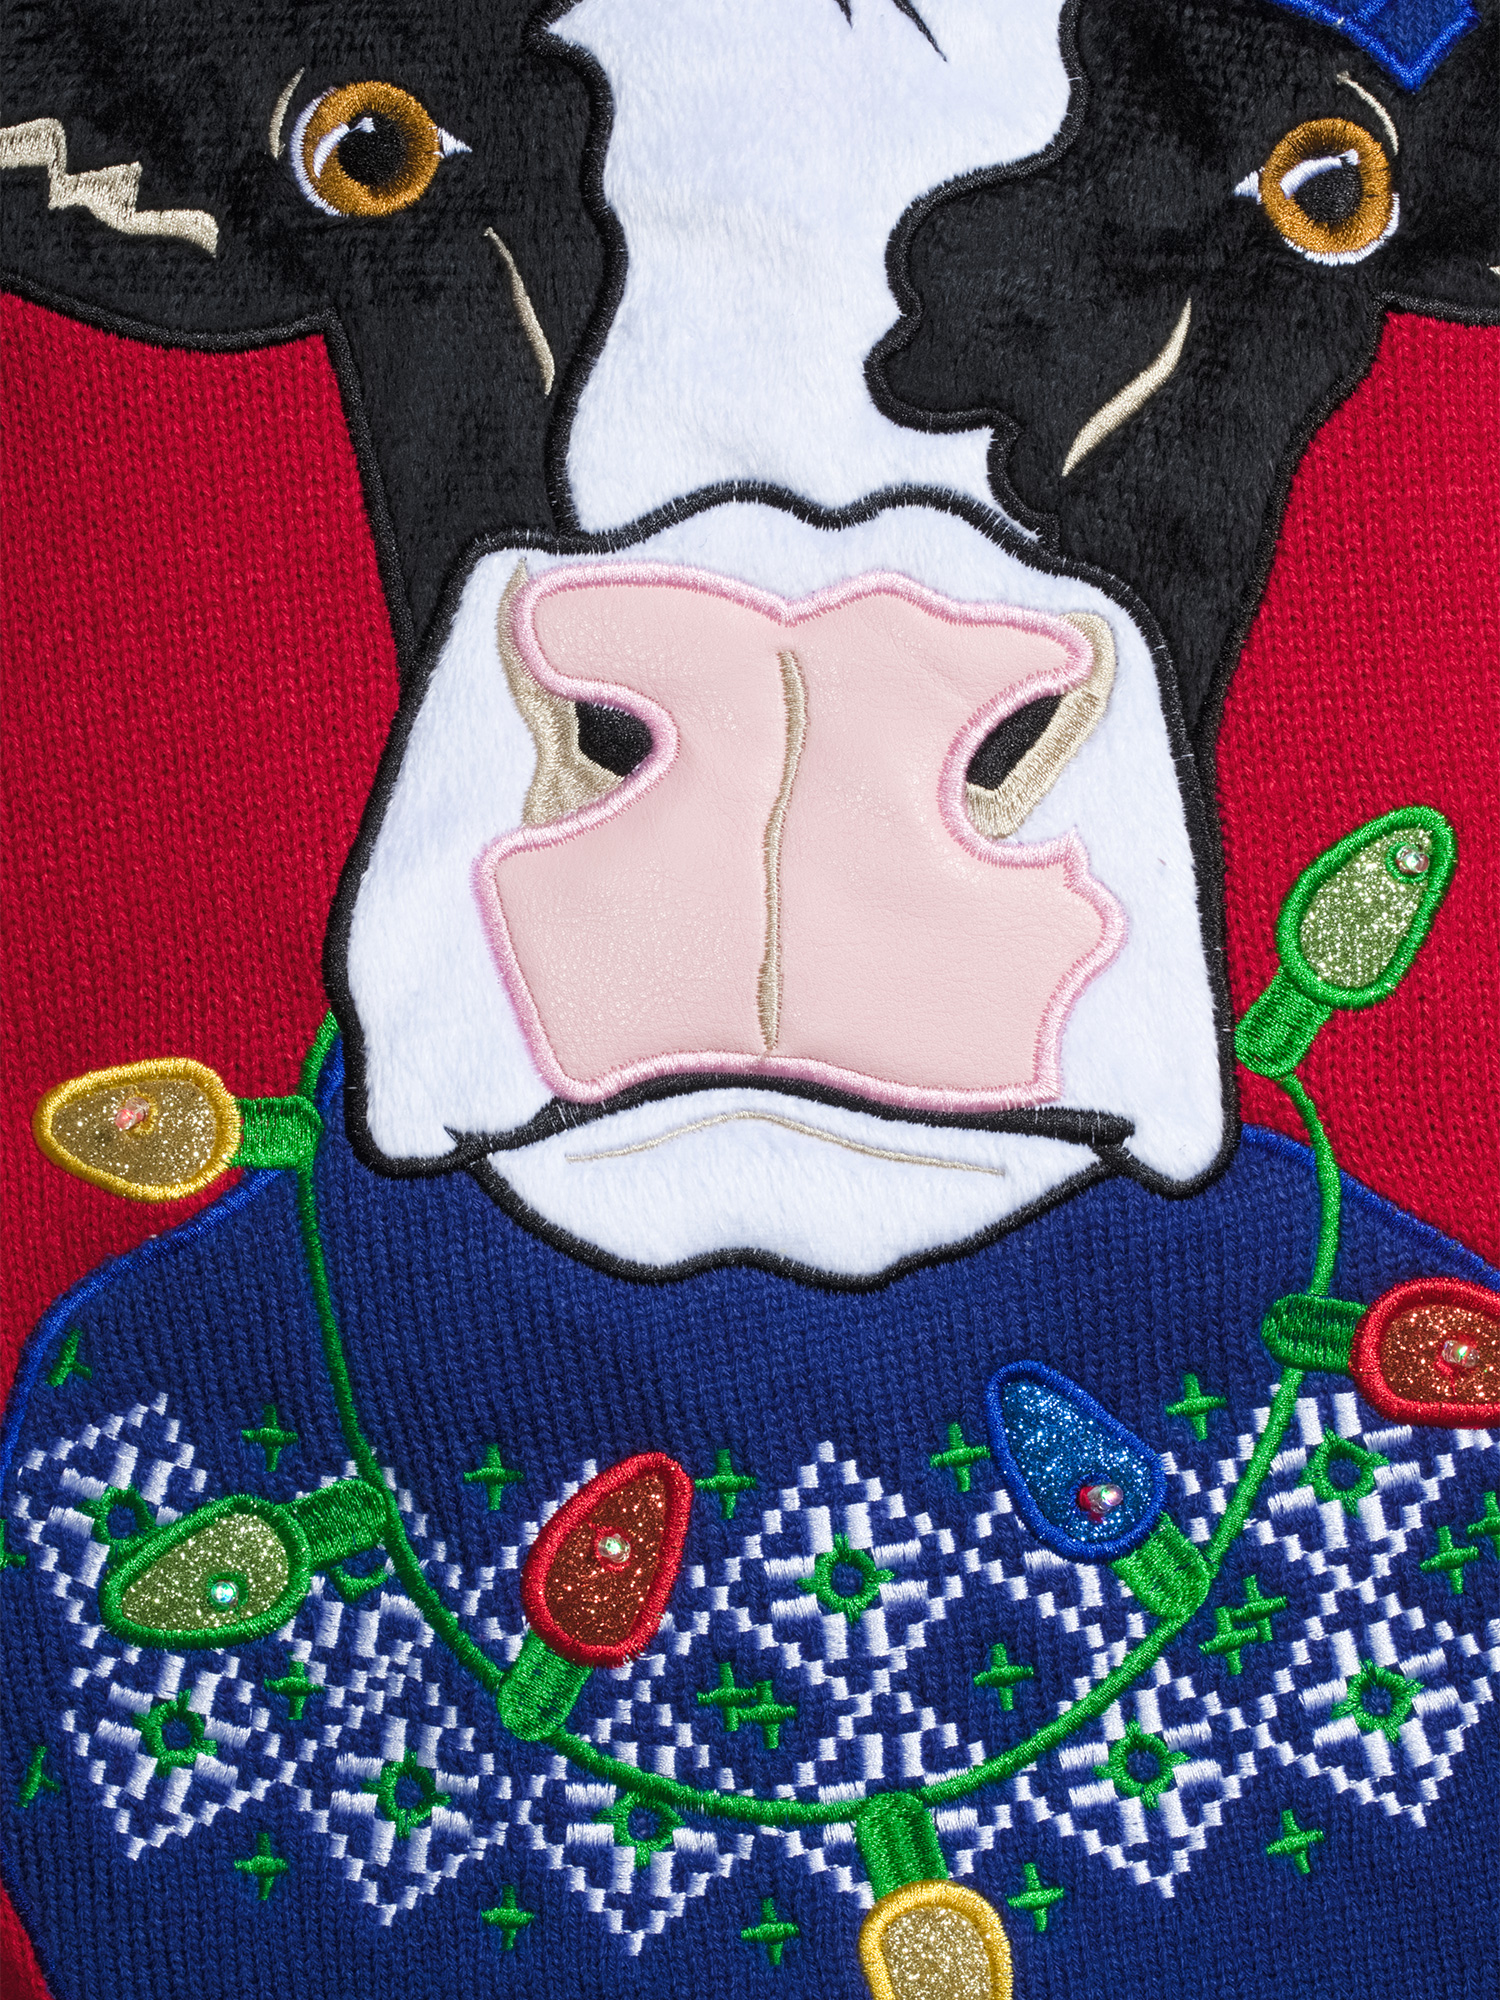 Holiday Time Men's Light-Up Cow Ugly Christmas Sweater - image 4 of 6